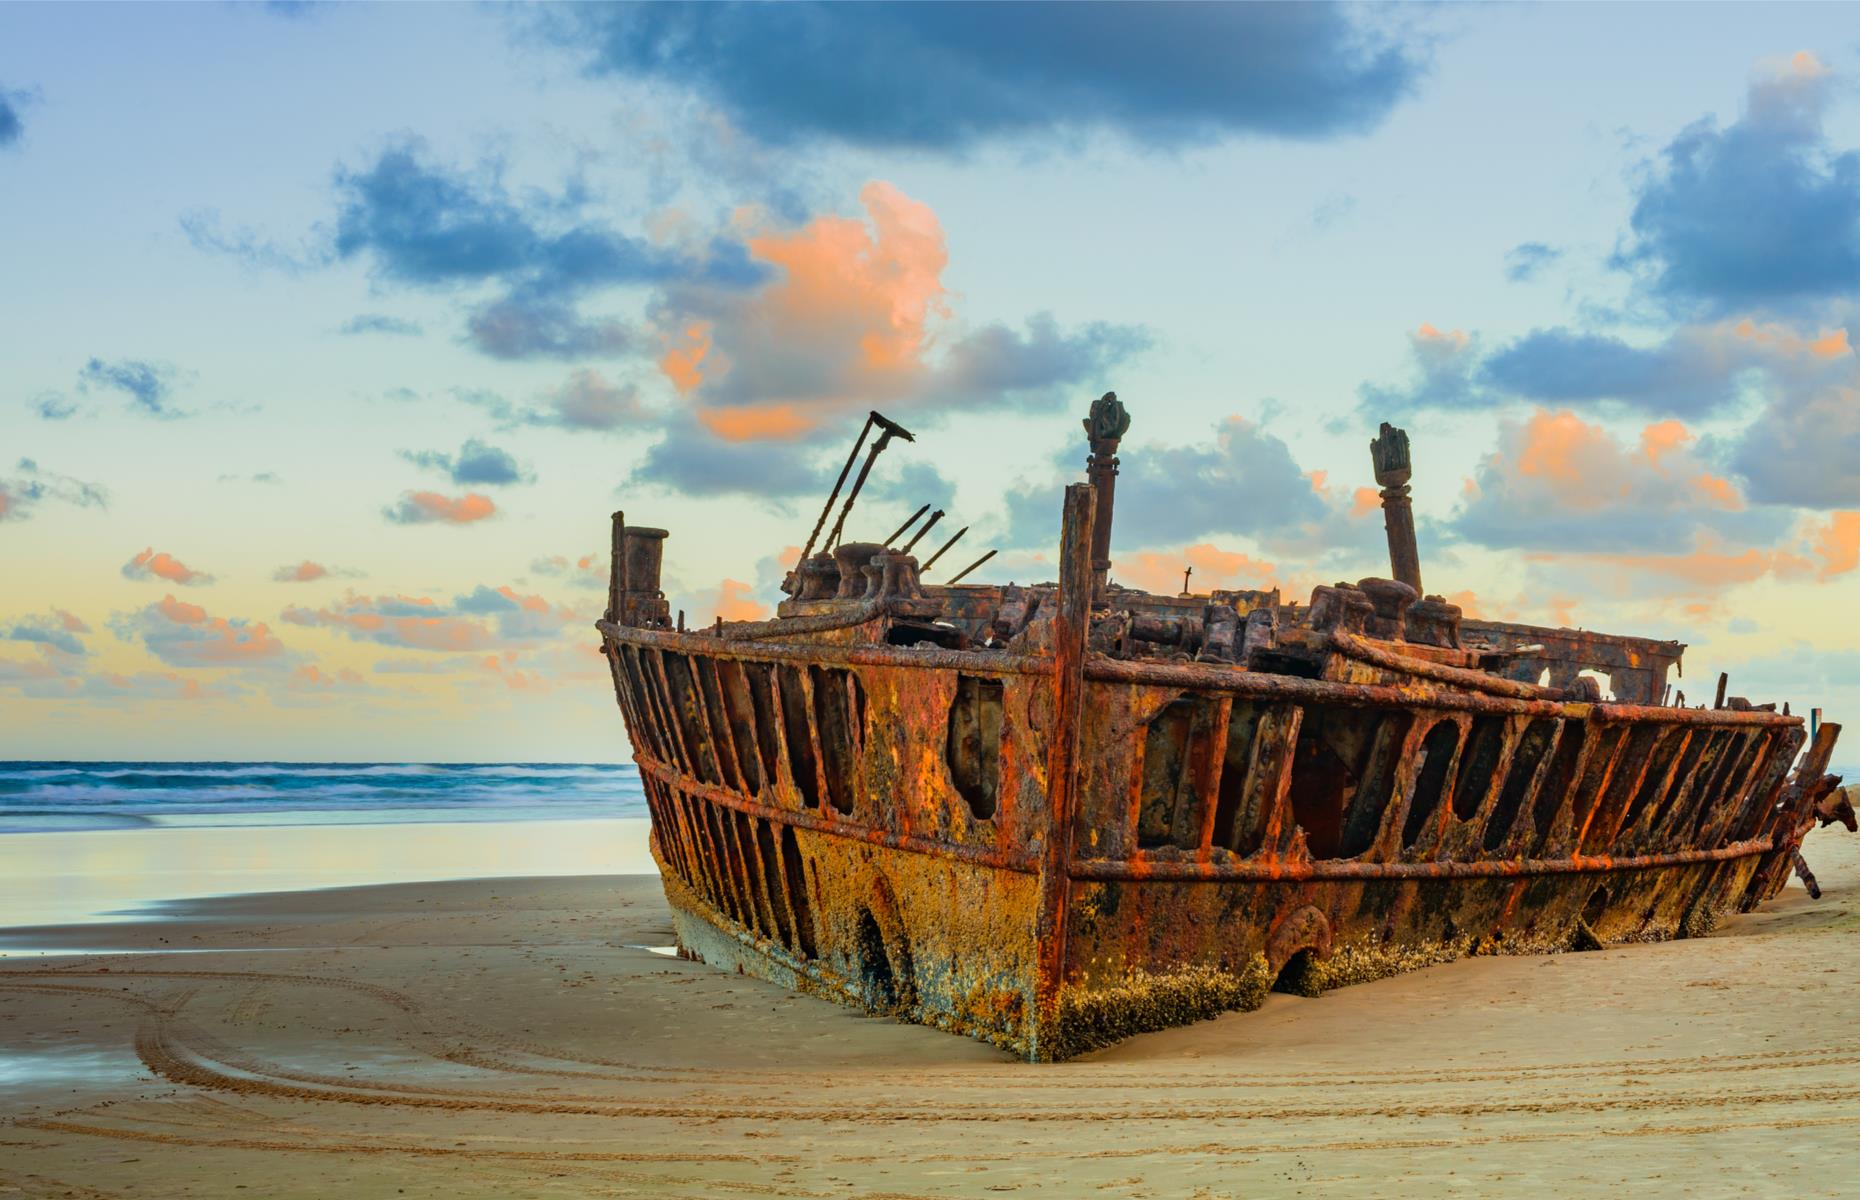 <p>The rusting remains of SS Maheno on Fraser Island’s vast 75 Mile Beach are an arresting sight and have become one its must-see landmarks. The rotting wreck was once an innovative ocean liner, built in 1905 and used to ferry passengers between Sydney and Auckland. She met her demise in 1935 on being towed to a Japanese wrecking yard, when a cyclone snapped the chain and she drifted onto the sand island’s shores. And here she’s stayed.</p>